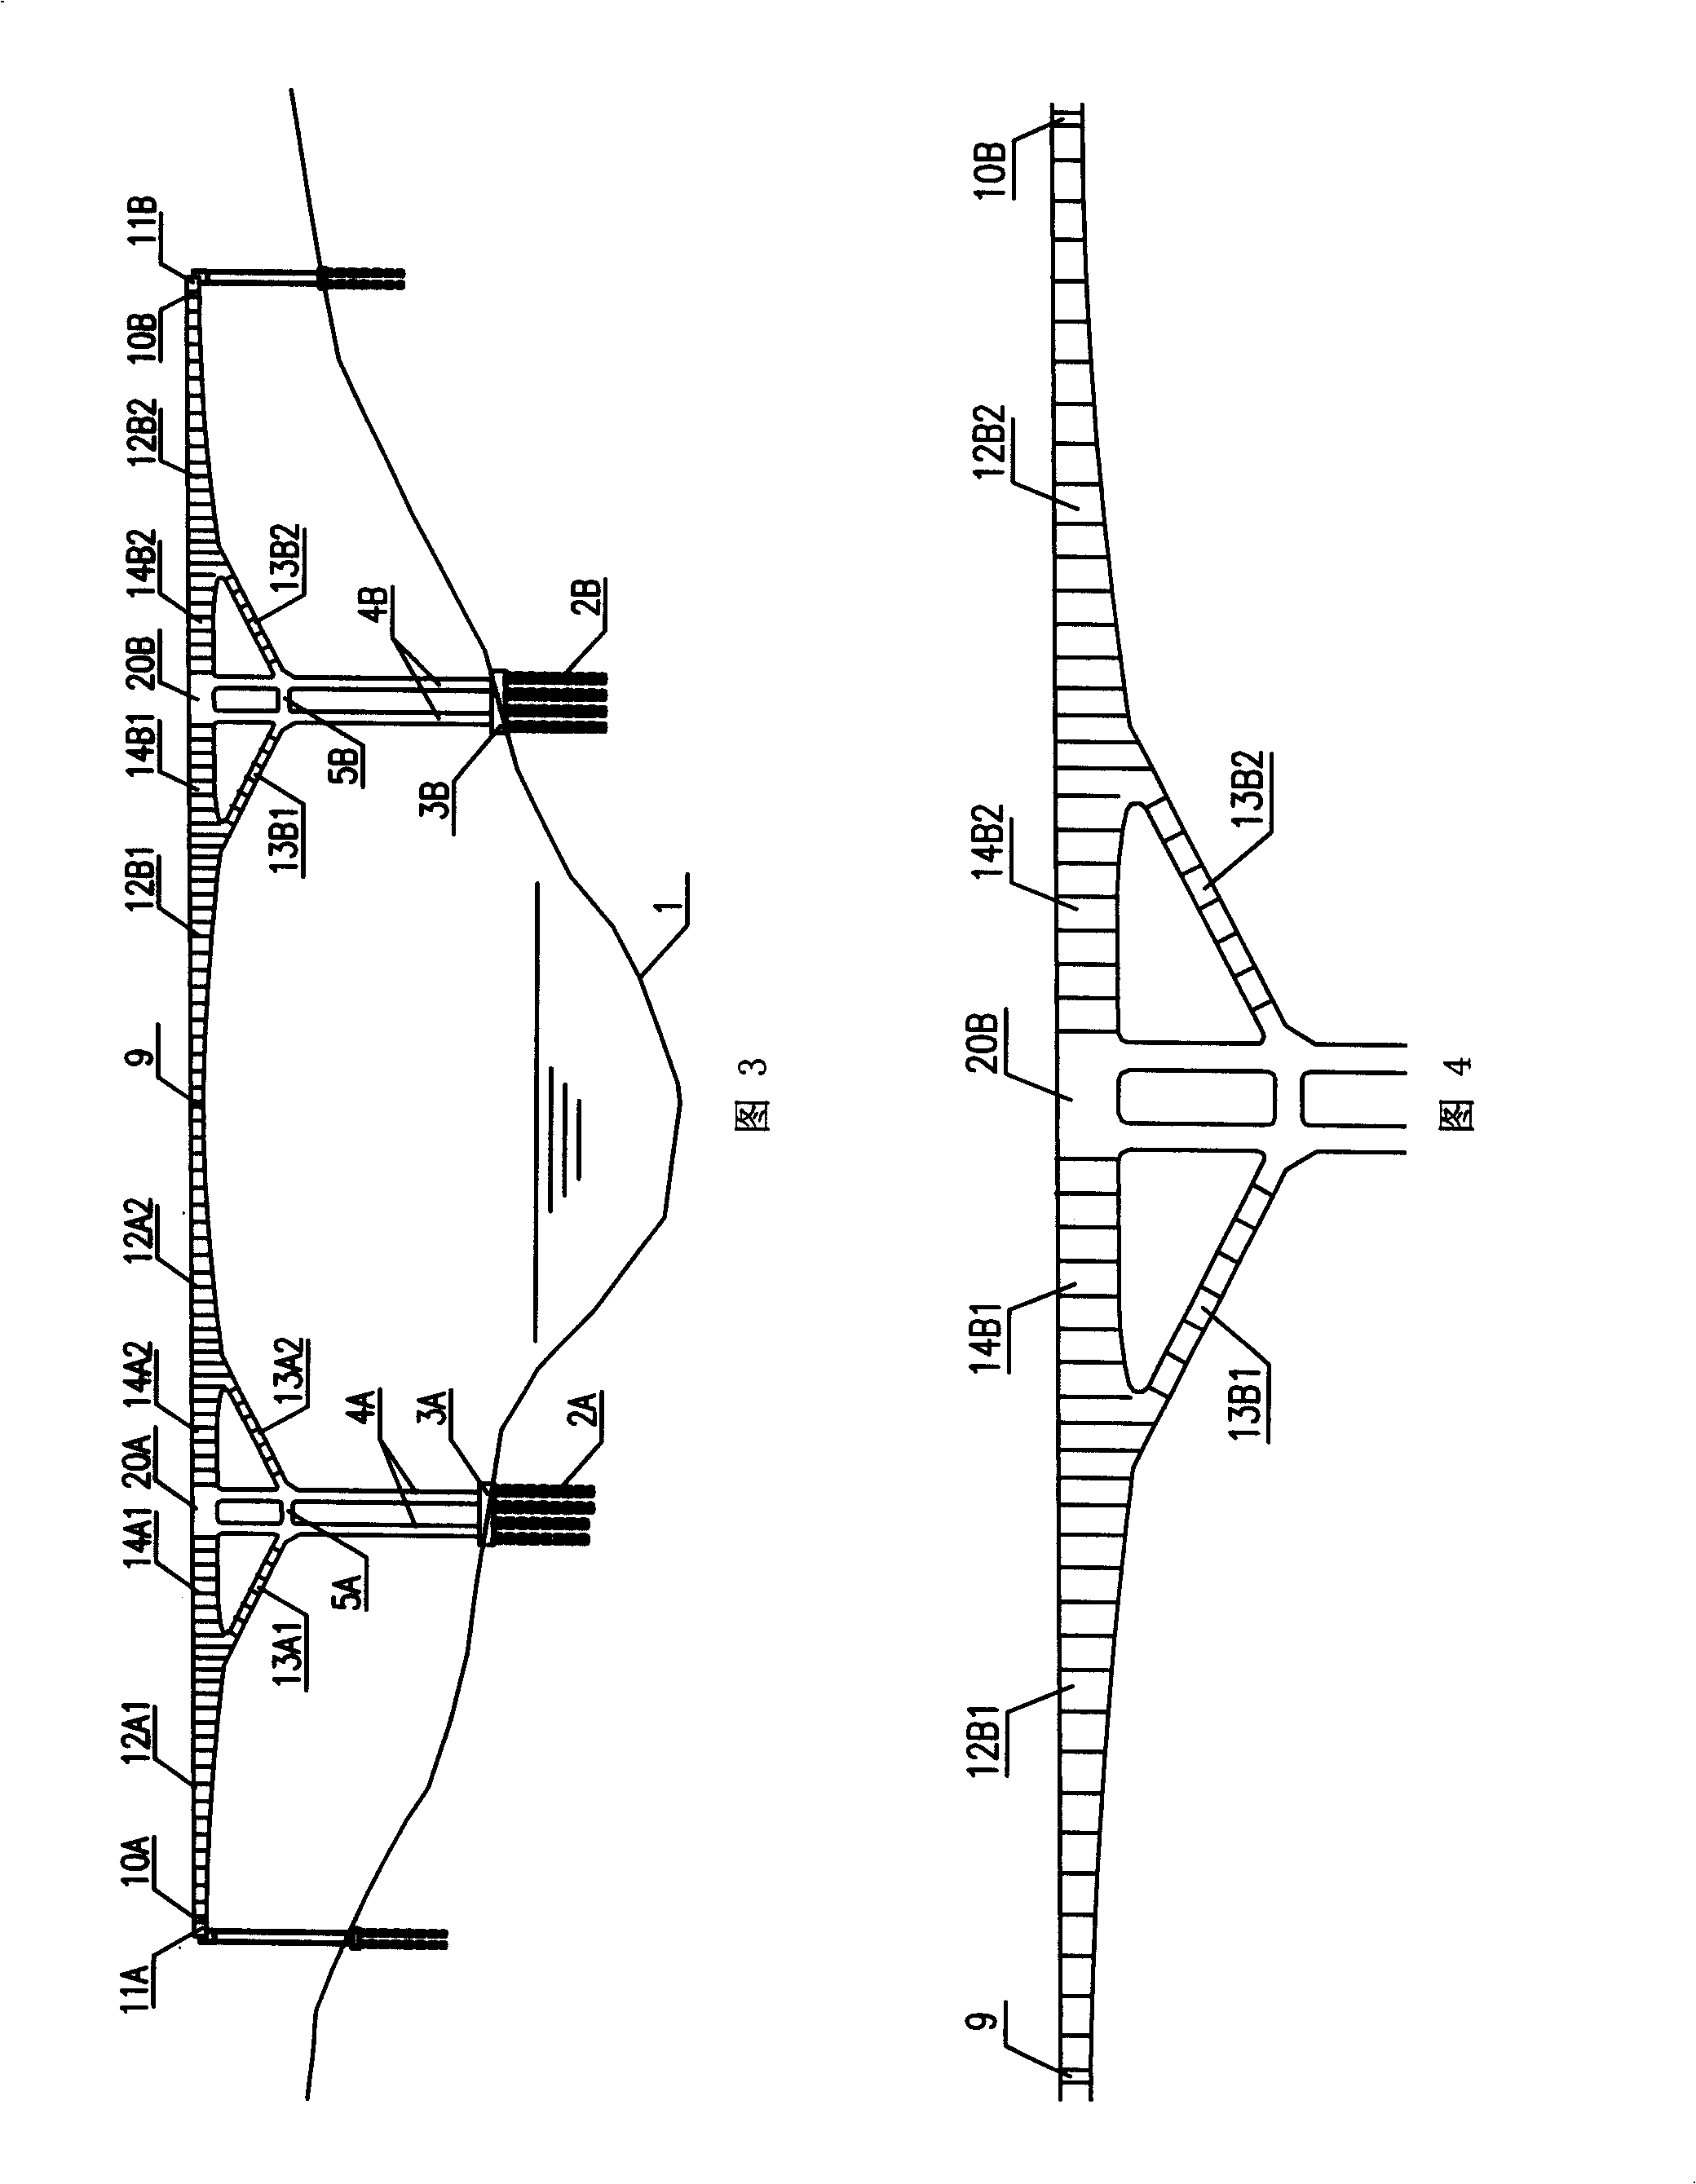 Structure of slant legged rigid frame bridge and cantalever pouring construction method